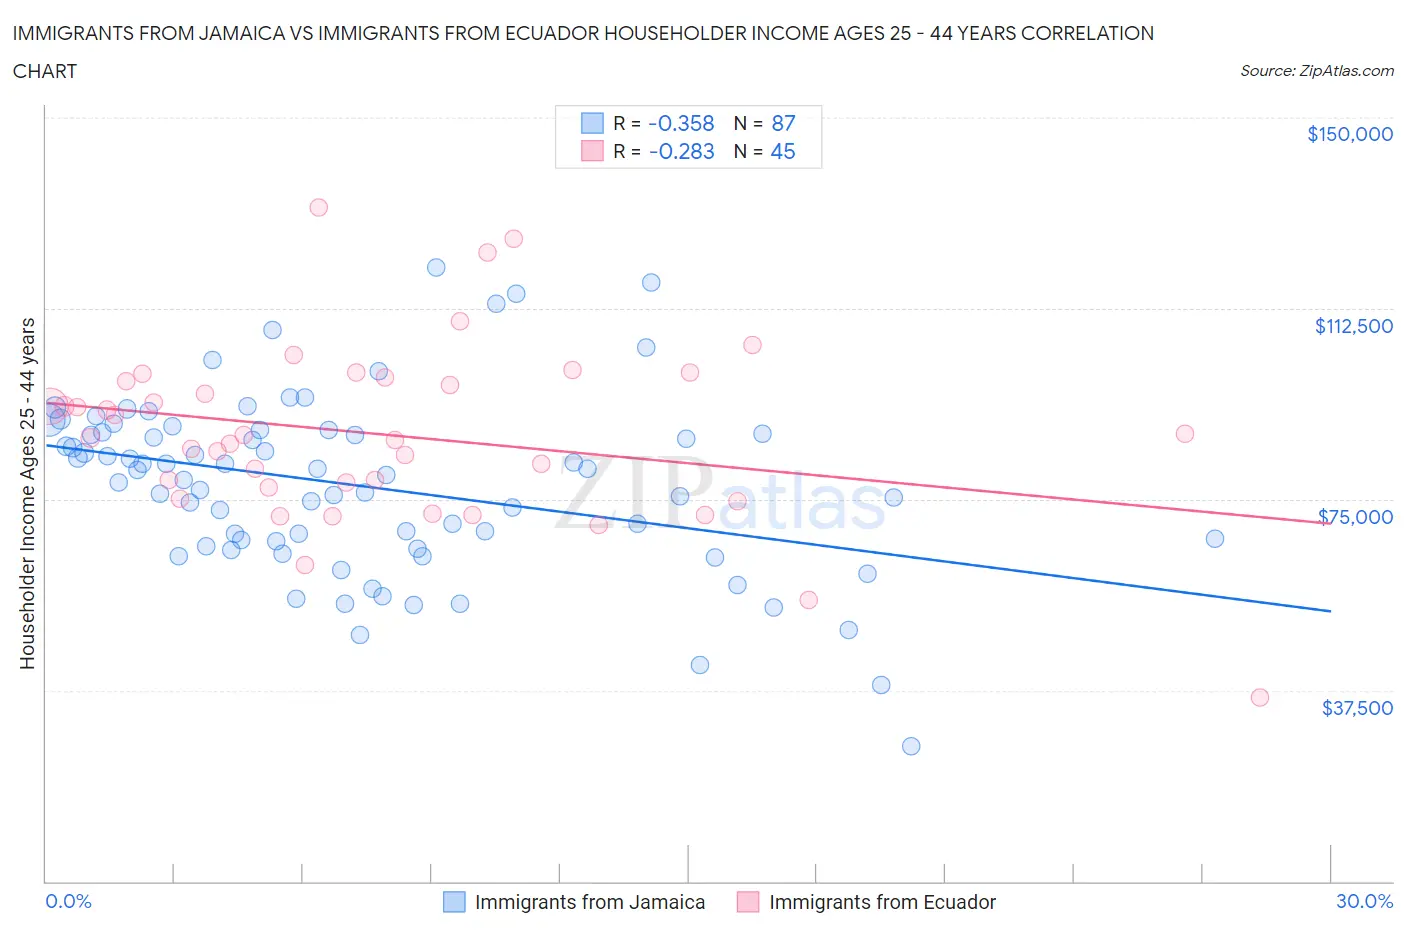 Immigrants from Jamaica vs Immigrants from Ecuador Householder Income Ages 25 - 44 years